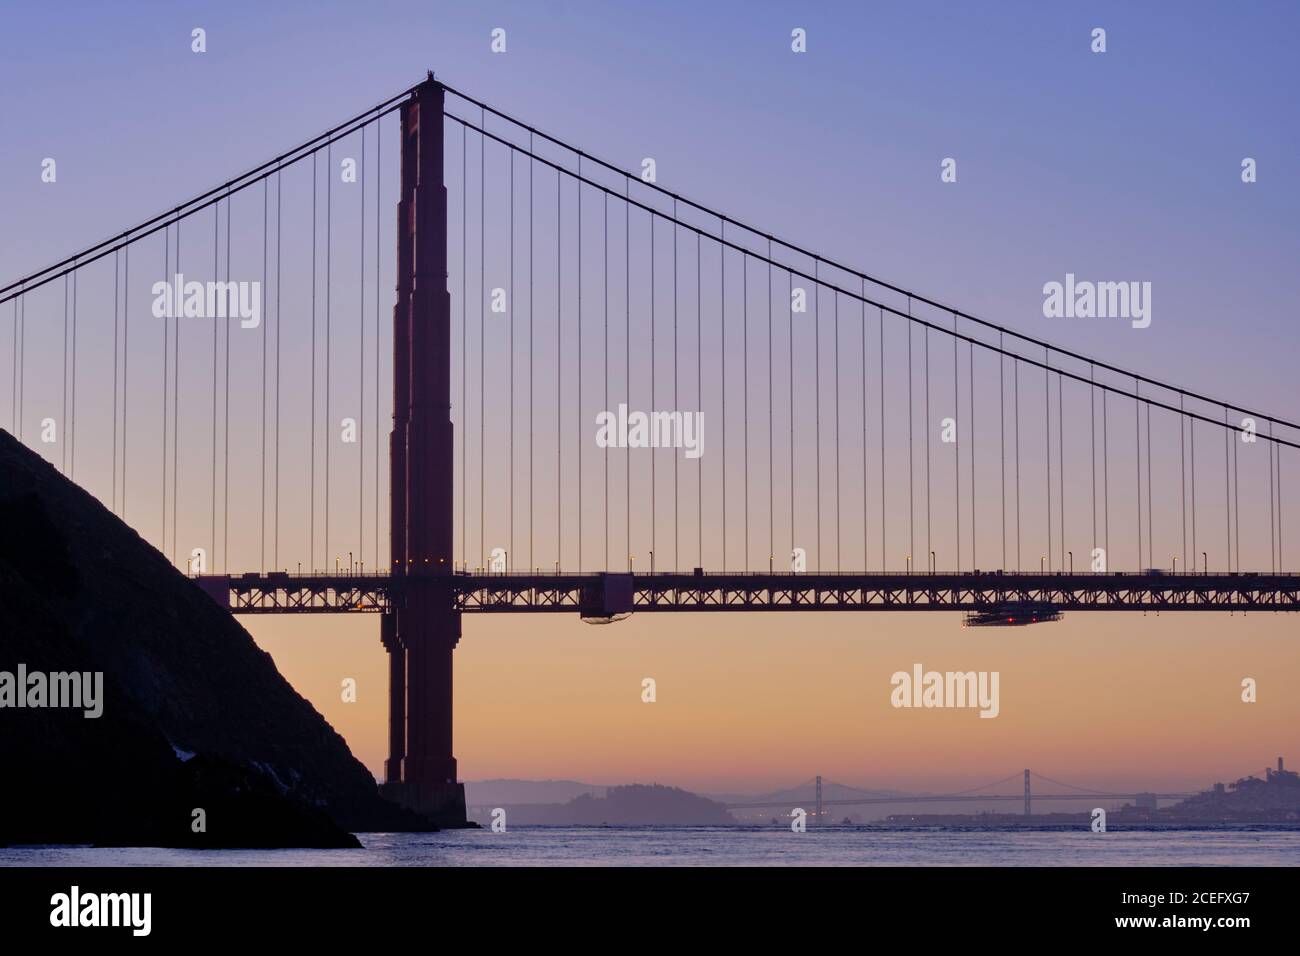 United States of America, California, Golden Gate Bridge. The iconic Golden Gate Bridge in San Francisco viewed from Kirby Cove at dawn. Stock Photo